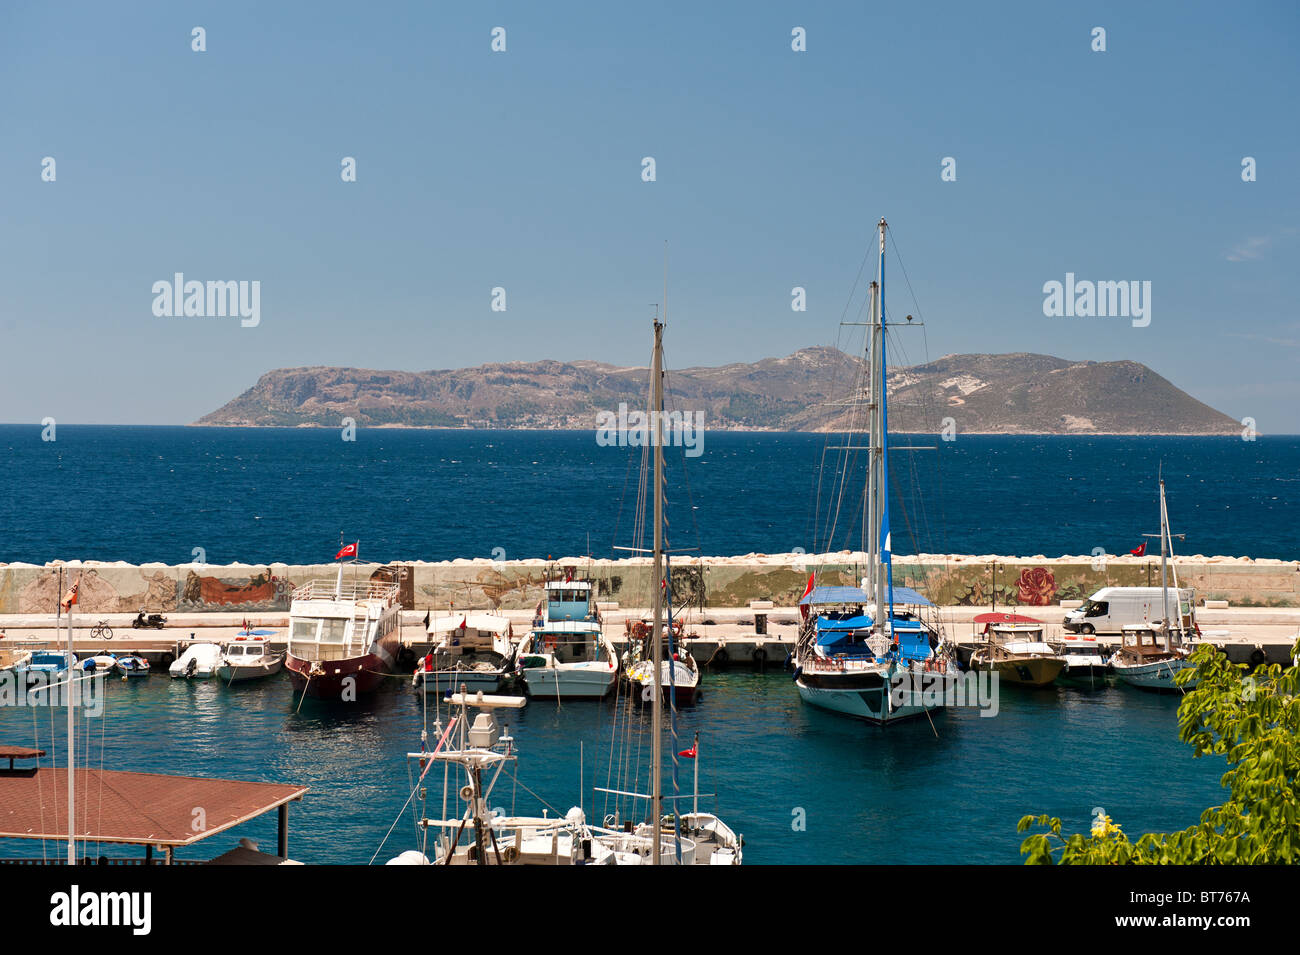 Boats and Yachts in harbour at Kas, Antalya, Turkey Stock Photo